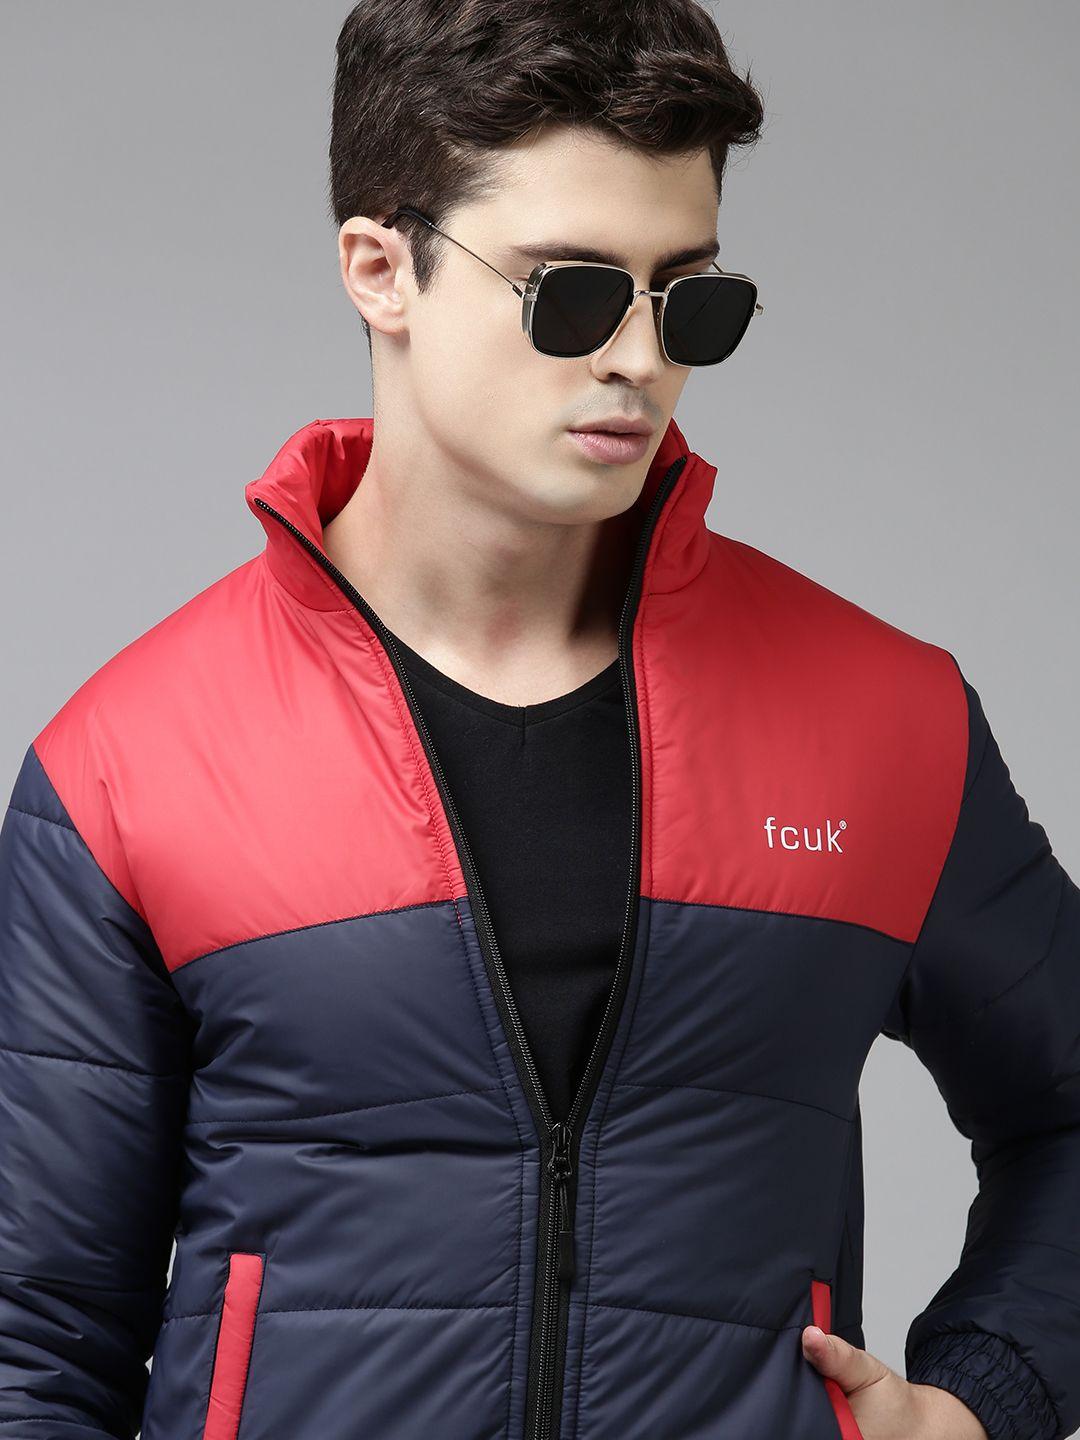 french connection men navy blue & red colourblocked puffer jacket